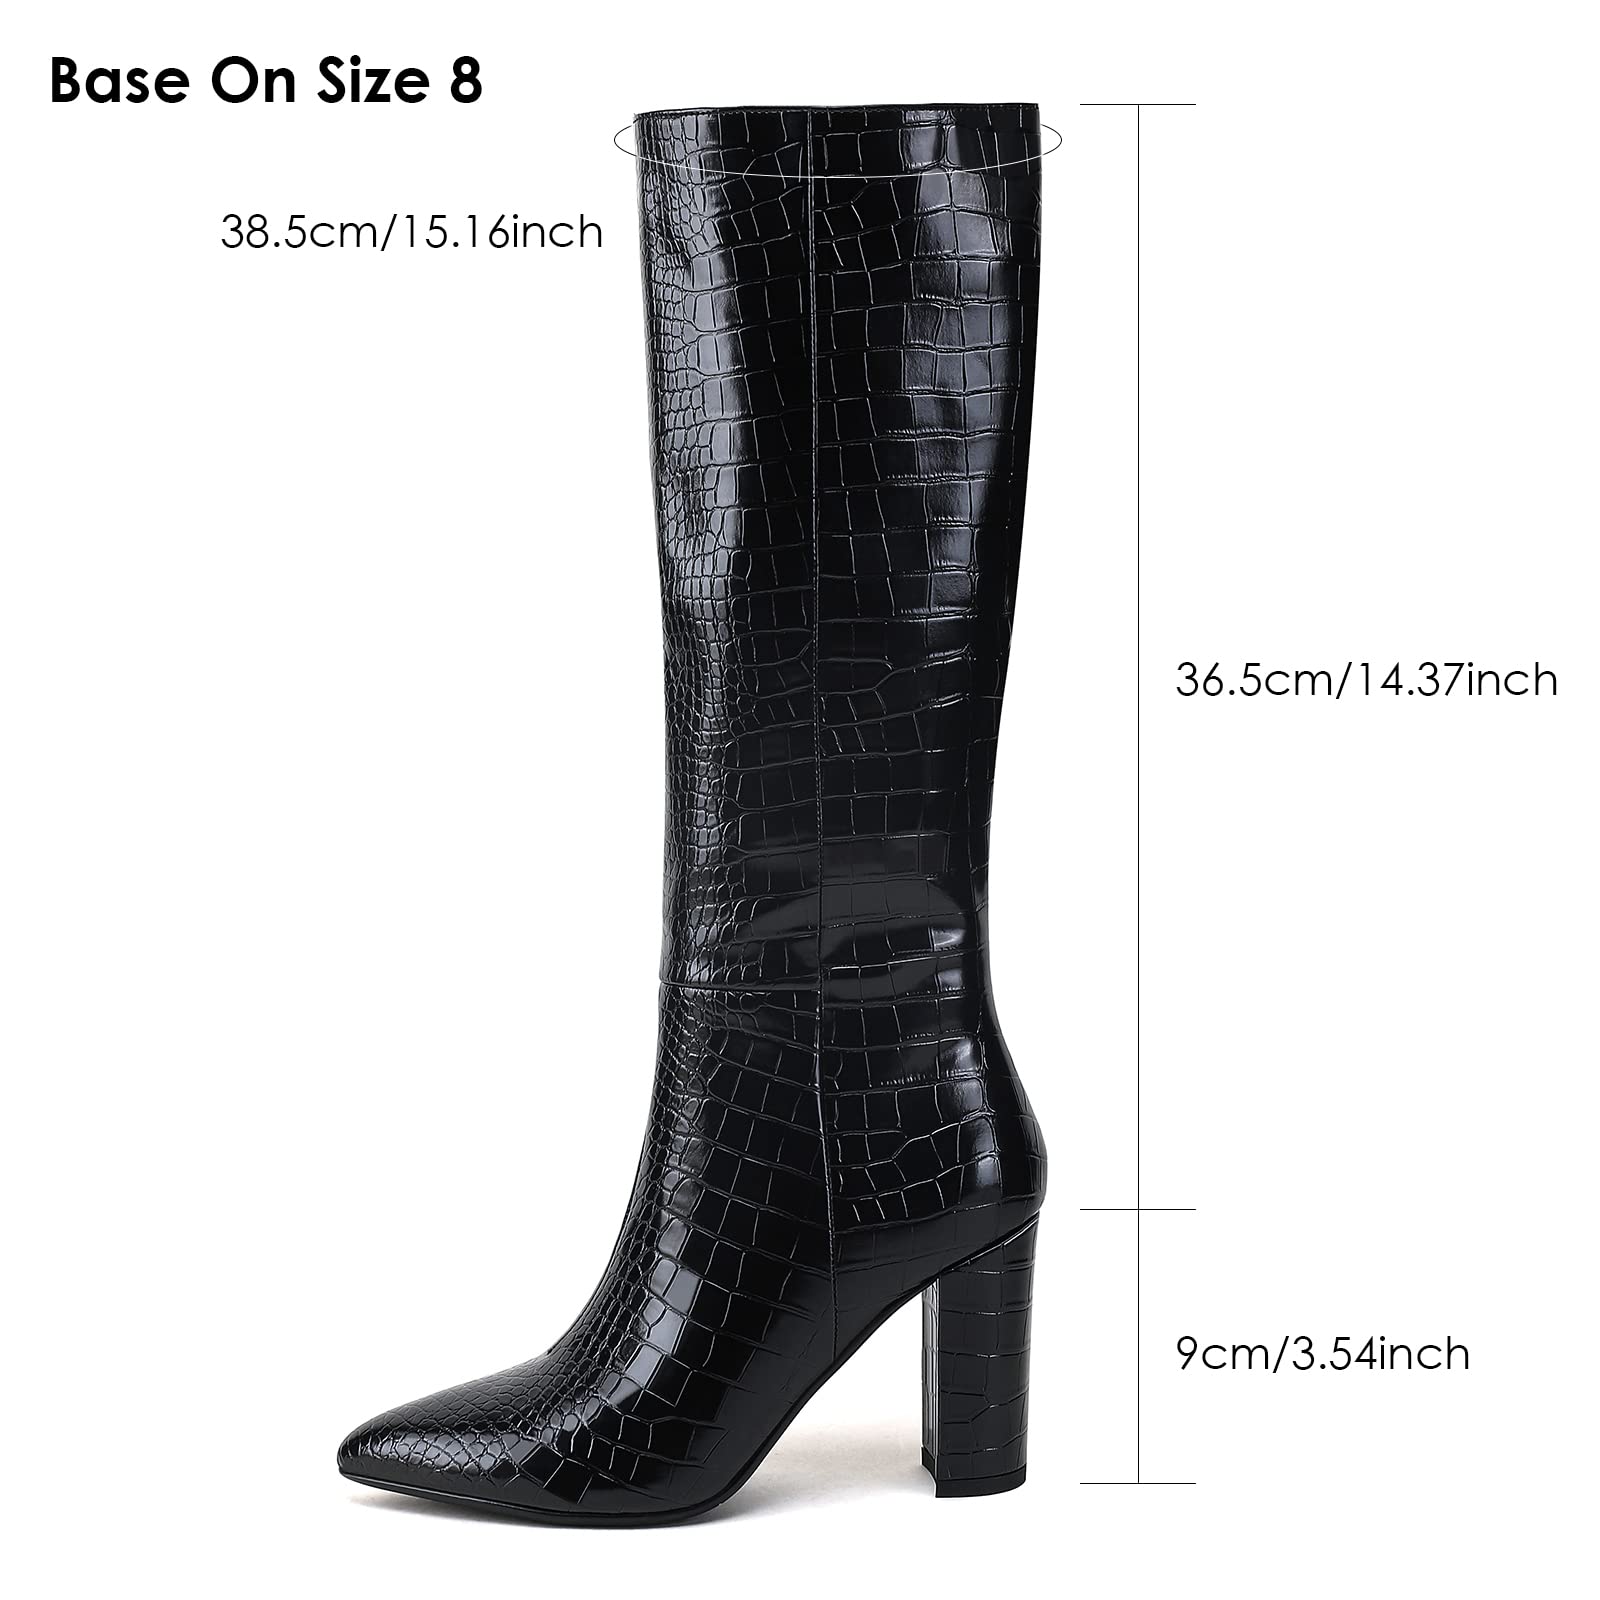 Modatope Knee High Boots Women Riding Boots for Women Tall Boots Long Boots Calf High Boots GoGo Boots Chunky Faux Crocodile Boots Block Heel Pointed Toe Boots Size 6-11